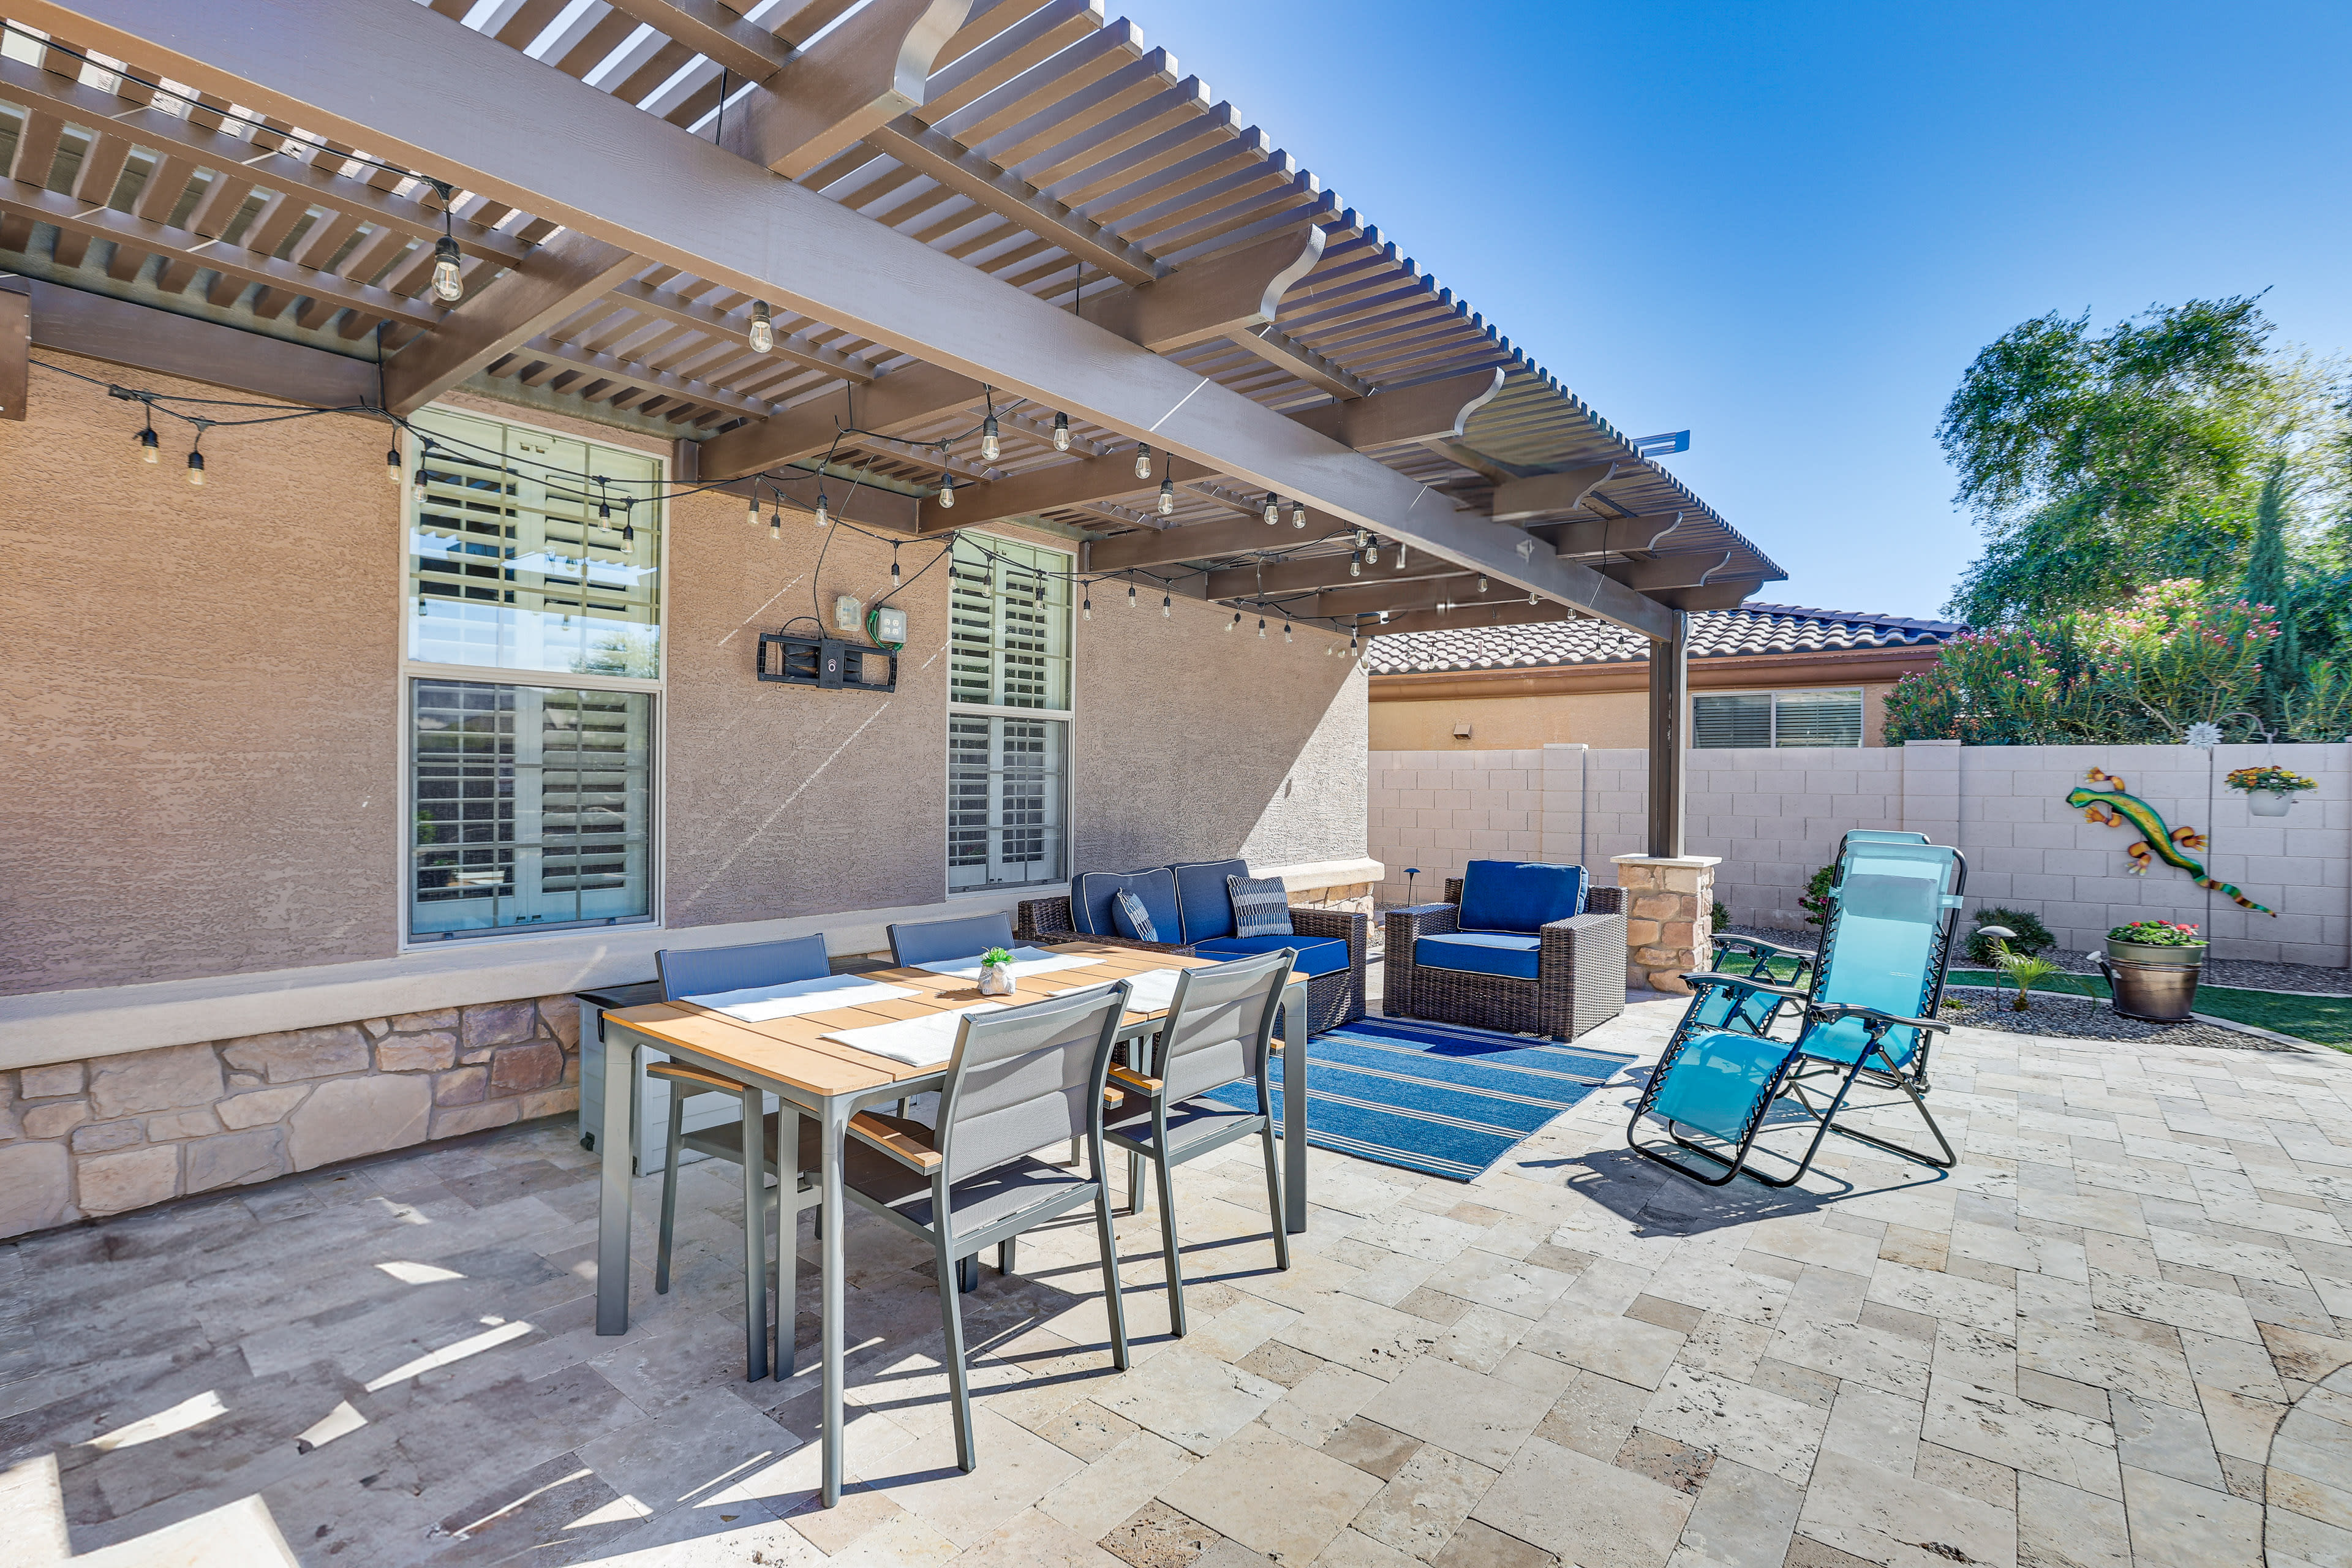 Patio | Gas Grill | Outdoor Dining Set